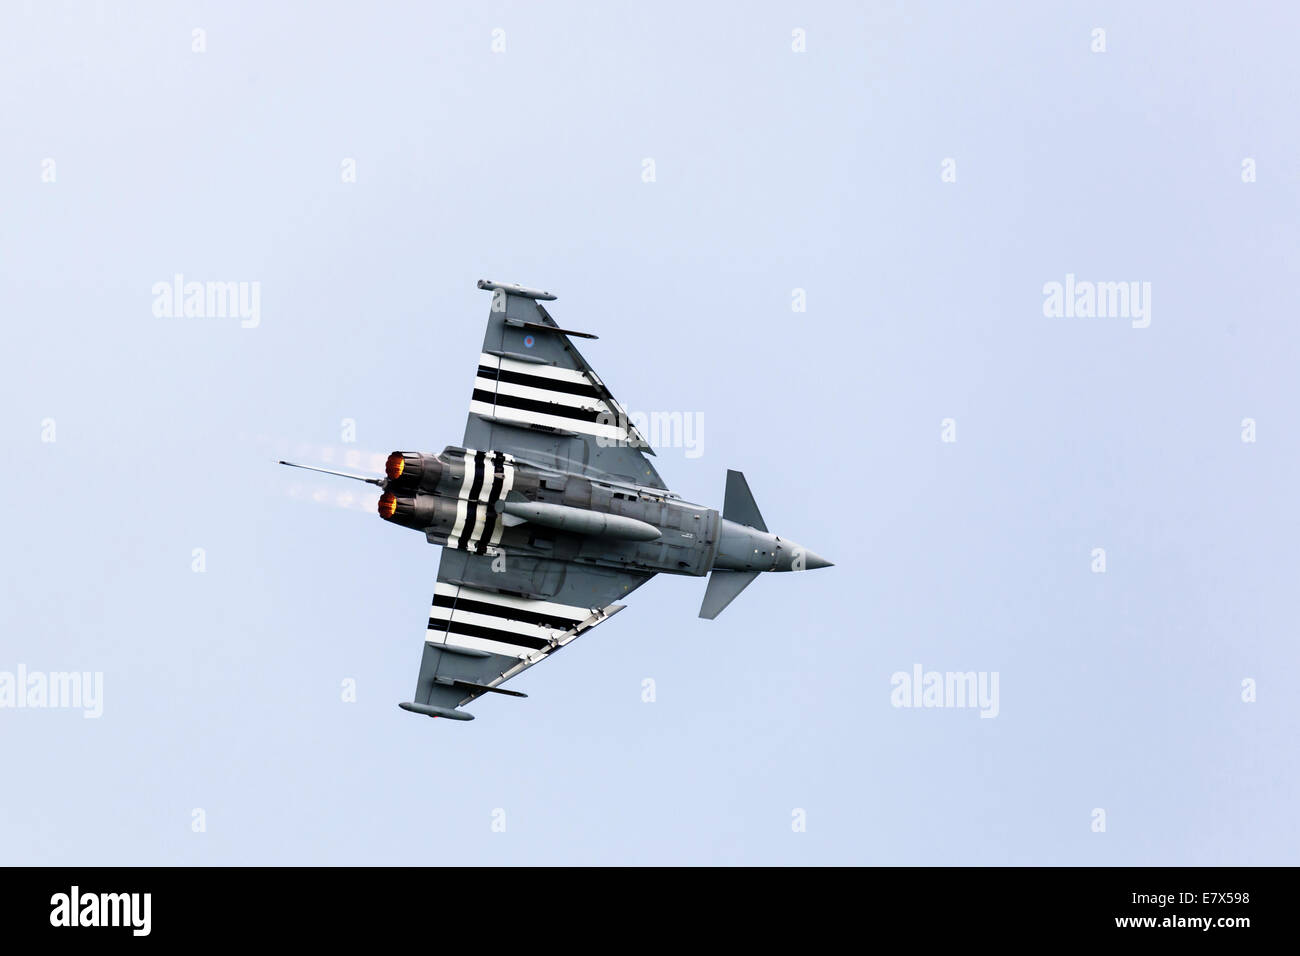 Royal Air Force Typhoon fighter aircraft flying with afterburners on at Eastbourne 2014 Airshow Stock Photo